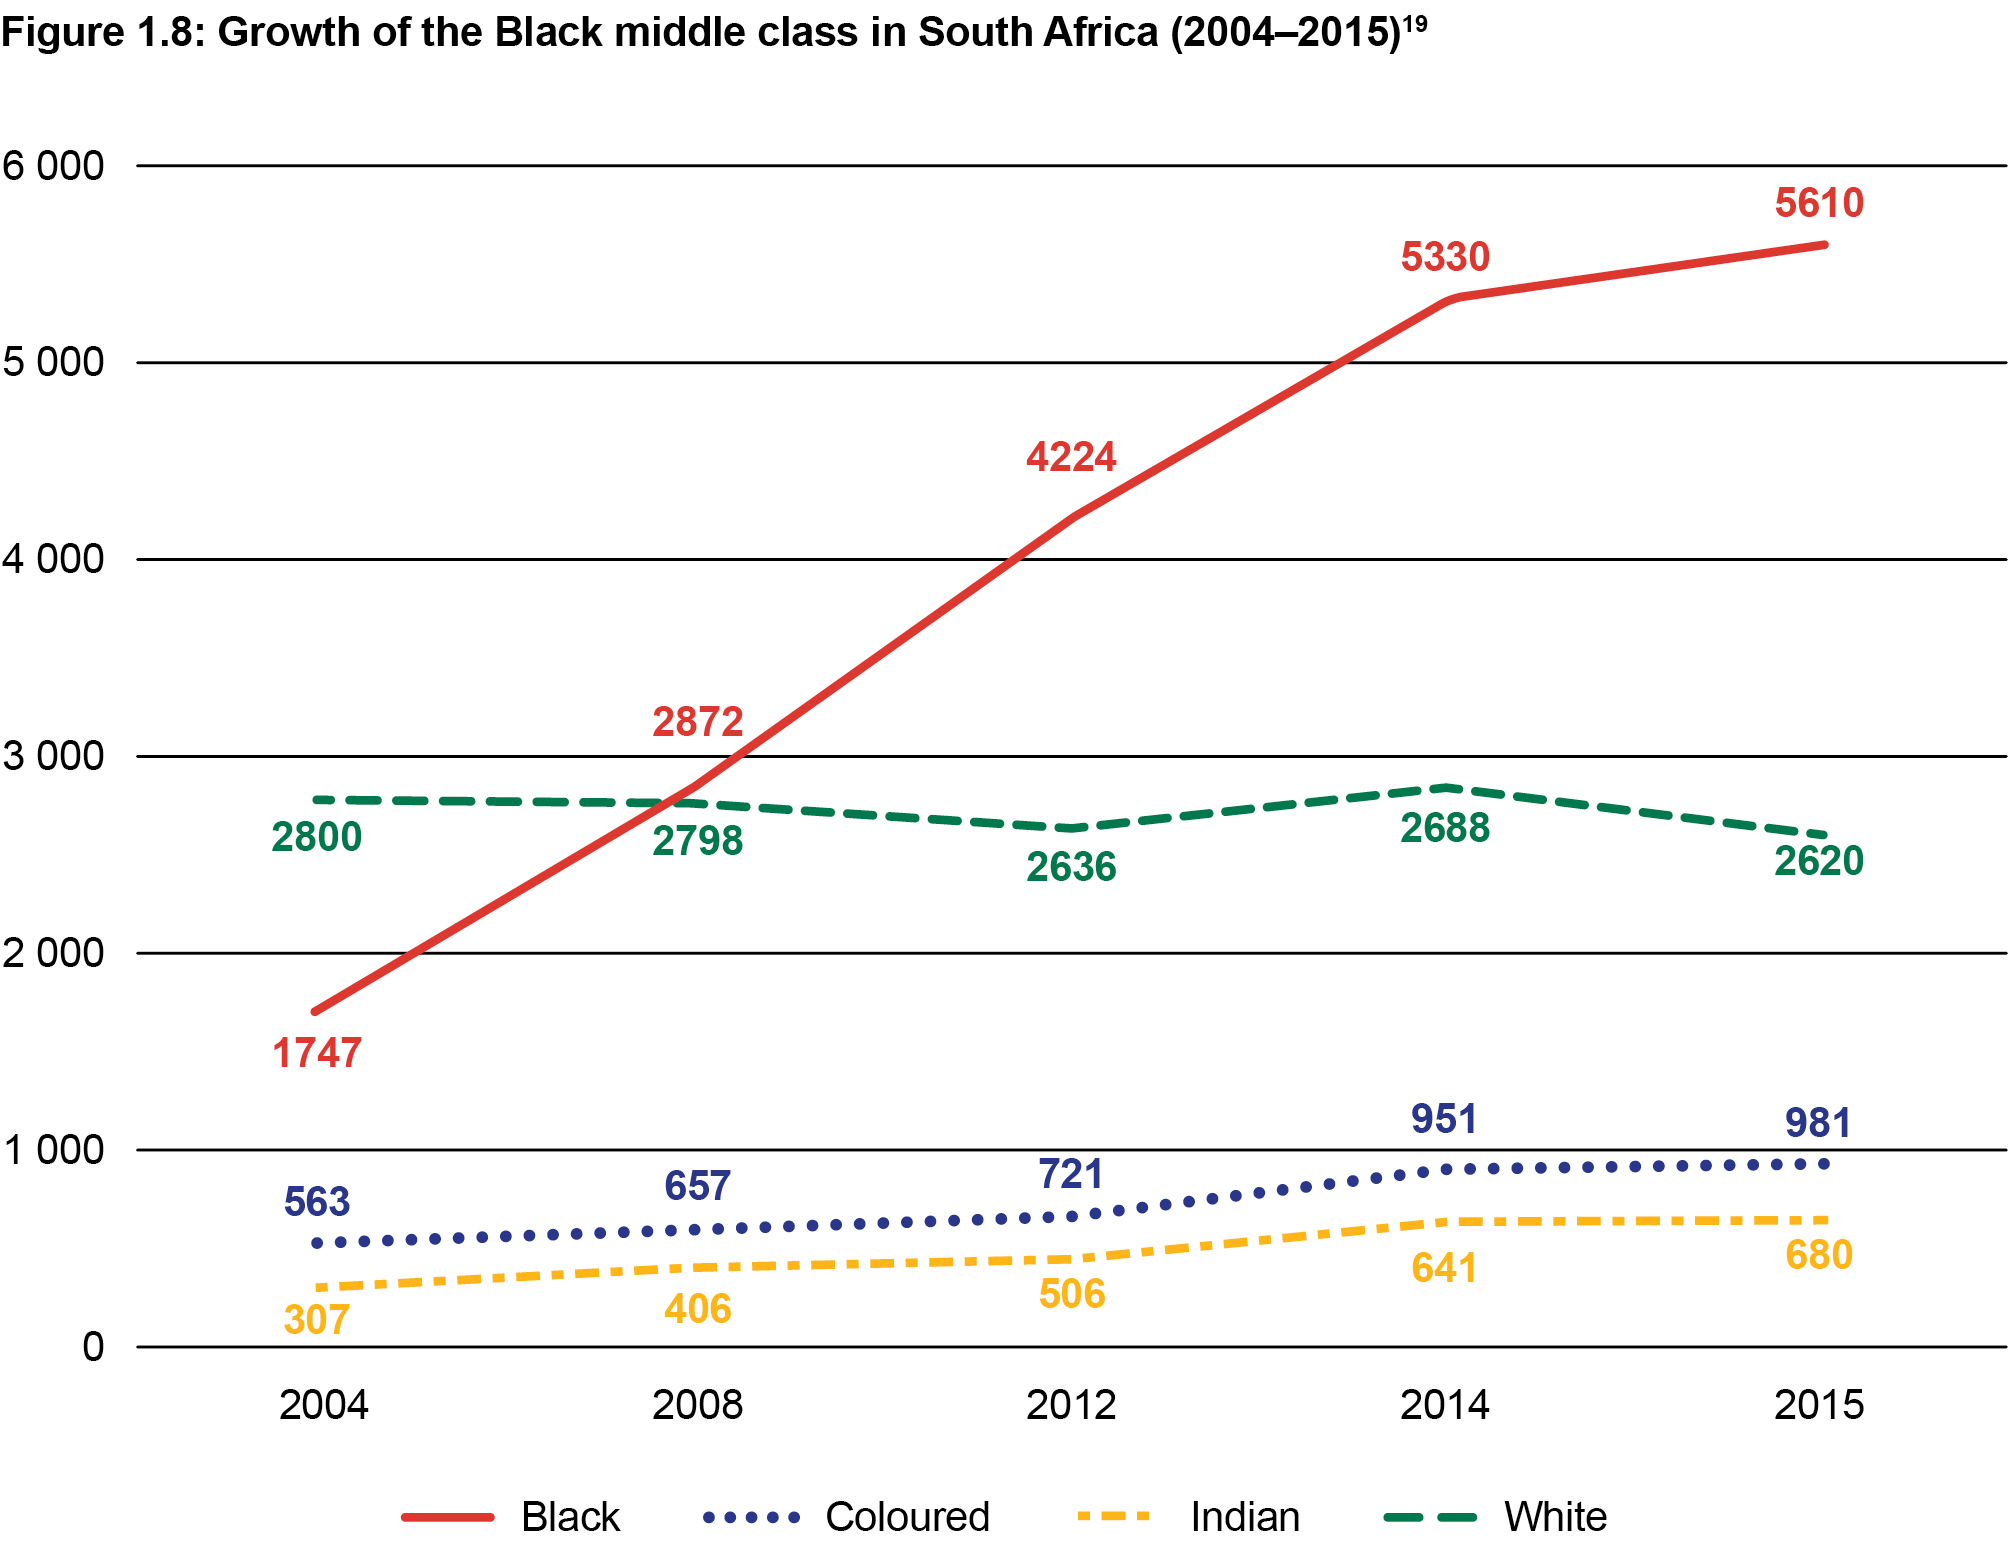 Figure 1.8: Growth of the Black middle class in South Africa (2004-2015)